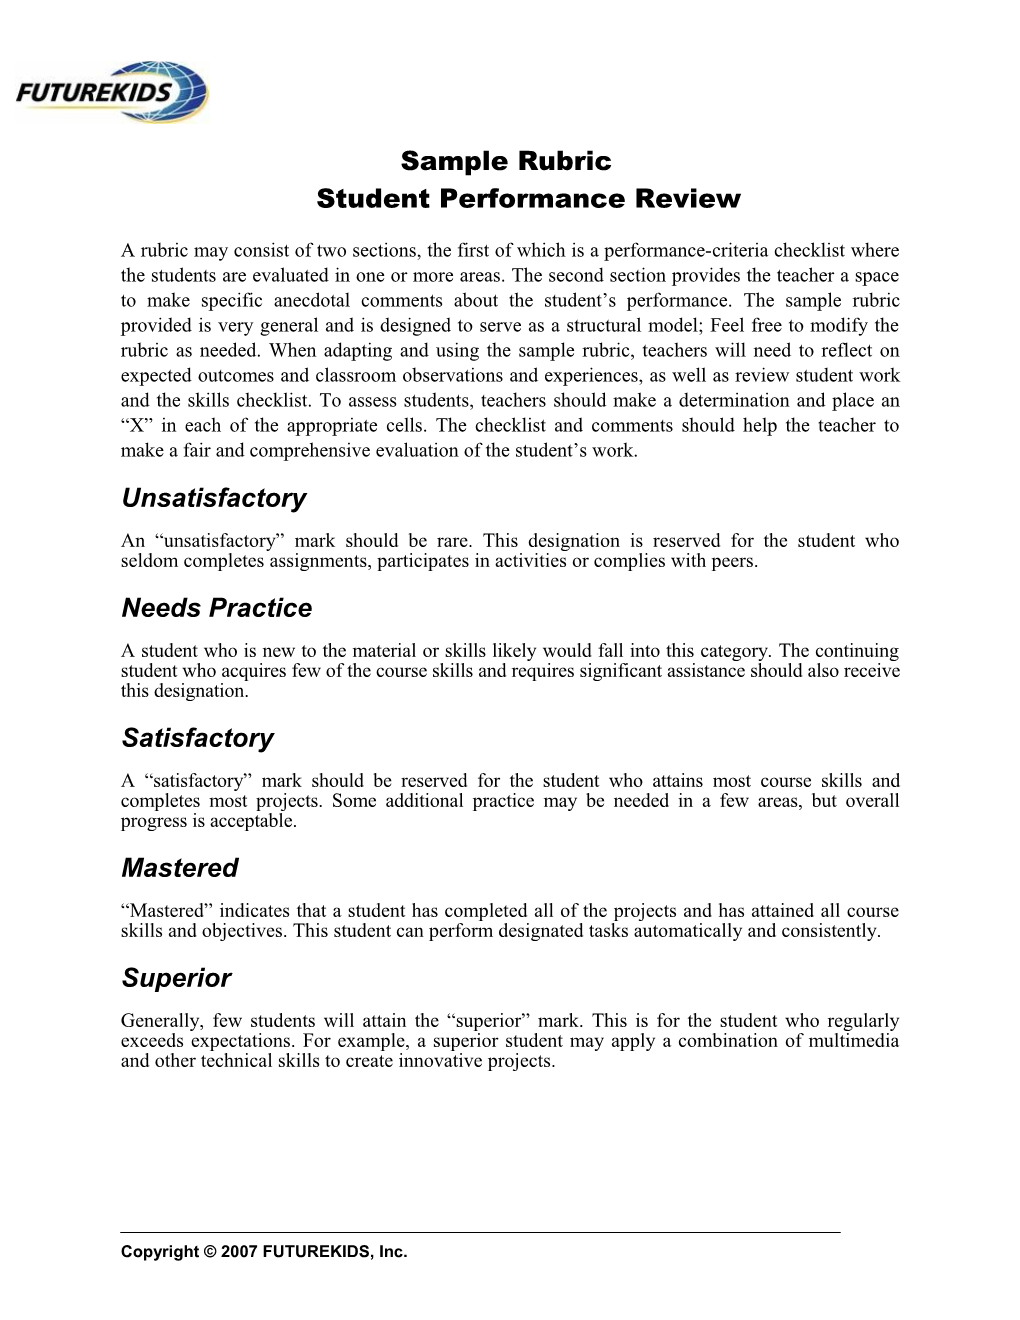 Sample Rubric Student Performance Review